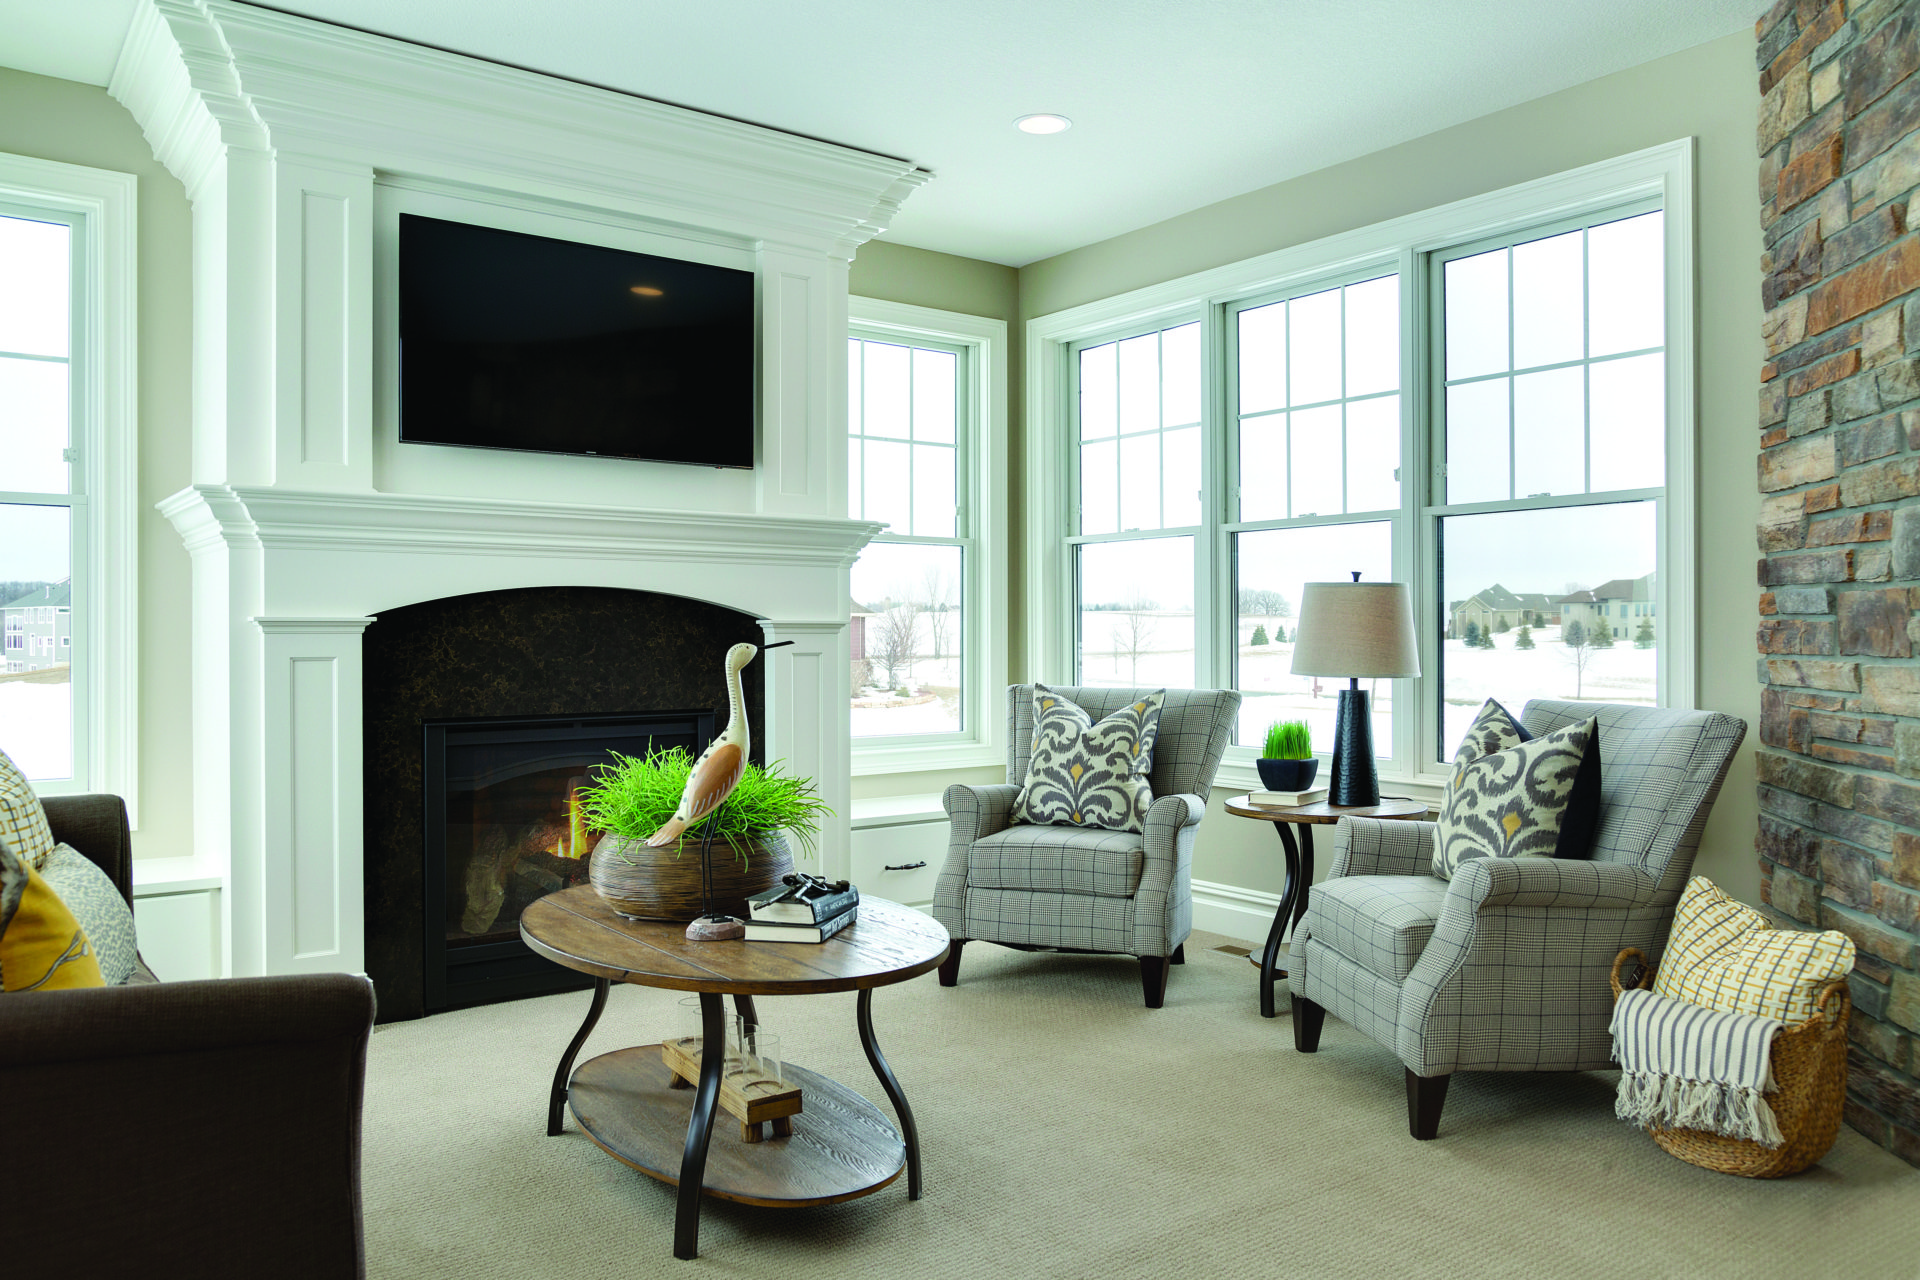 An elegant living room with a large fireplace and Andersen 400 series double hung windows in white